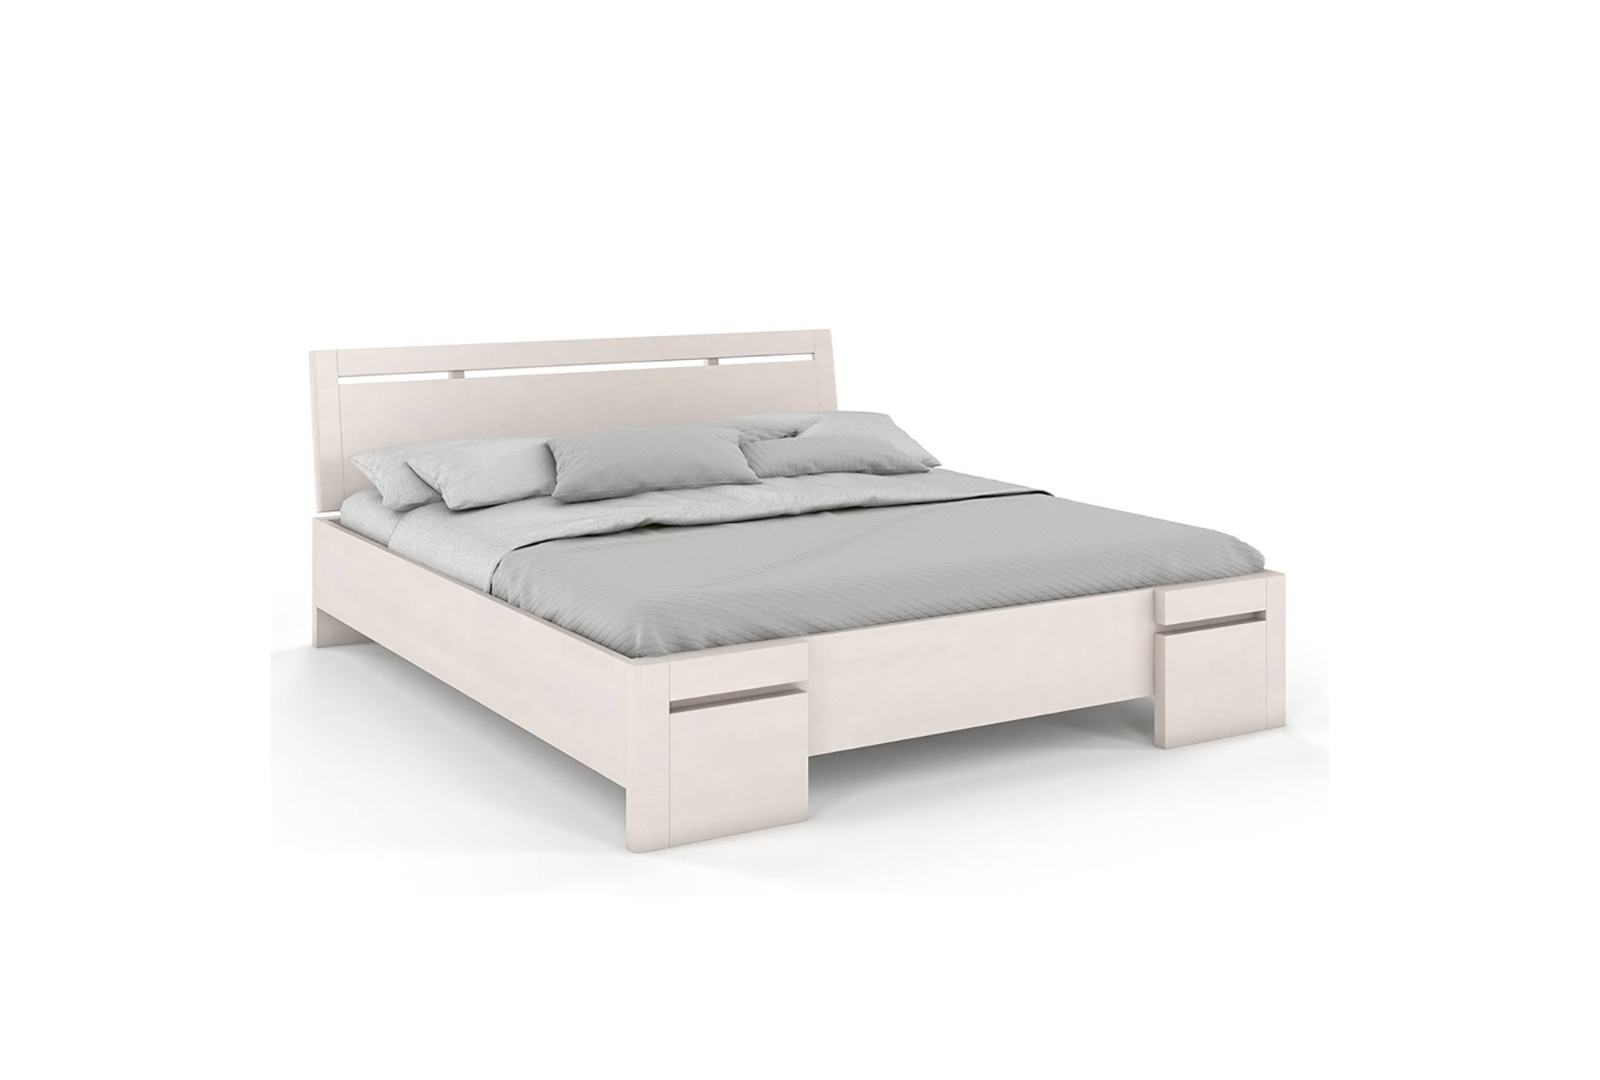 VISBY SALERNO HIGH BEECH BED 3